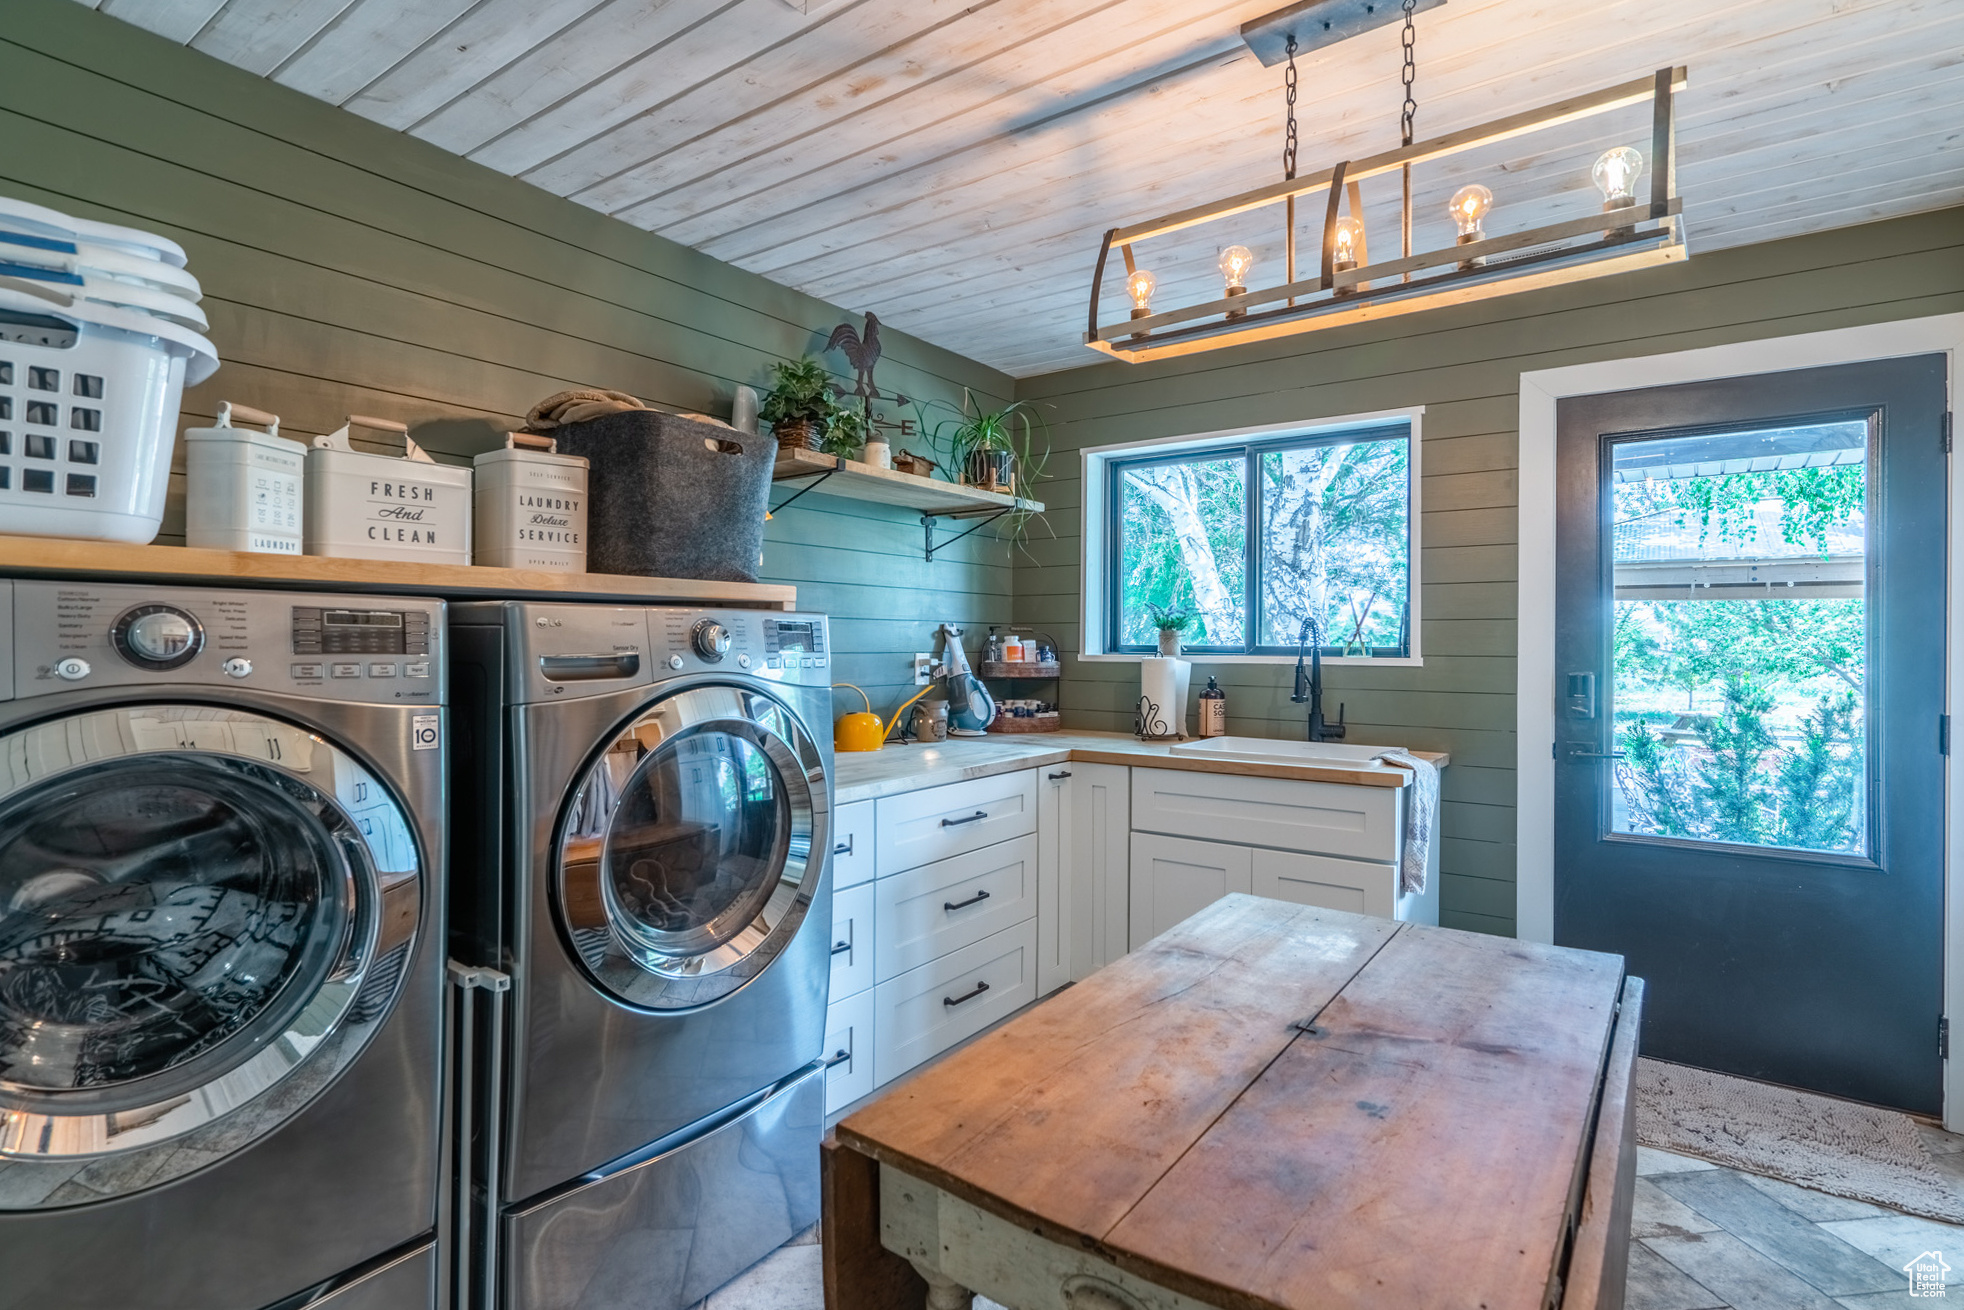 Laundry area with washer and dryer, wooden walls, wood ceiling, a notable chandelier, and sink